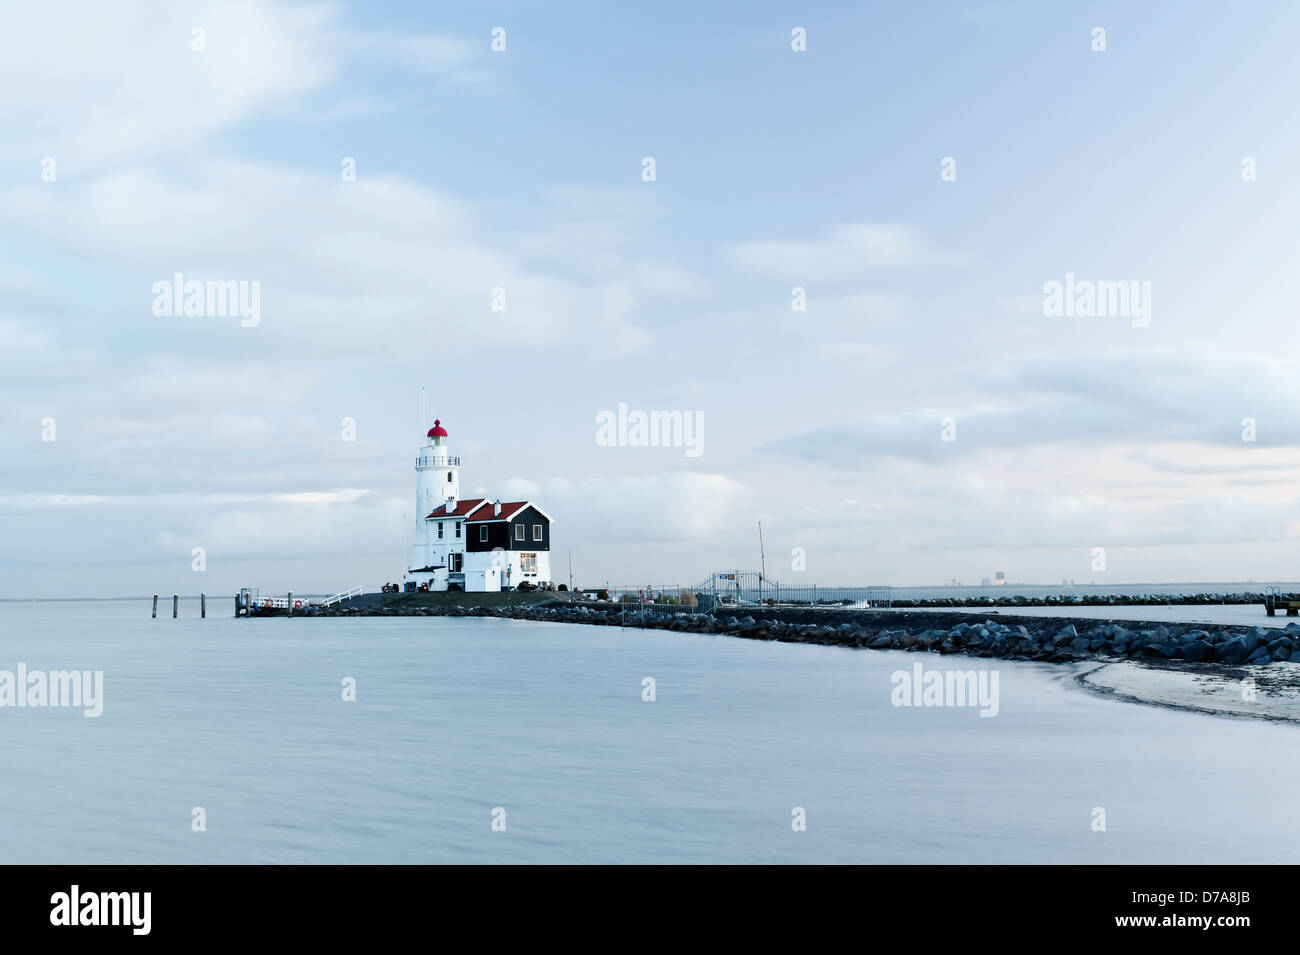 Paard van Marken or the Horse Lighthouse in Holland, Netherlands in the evening light Stock Photo